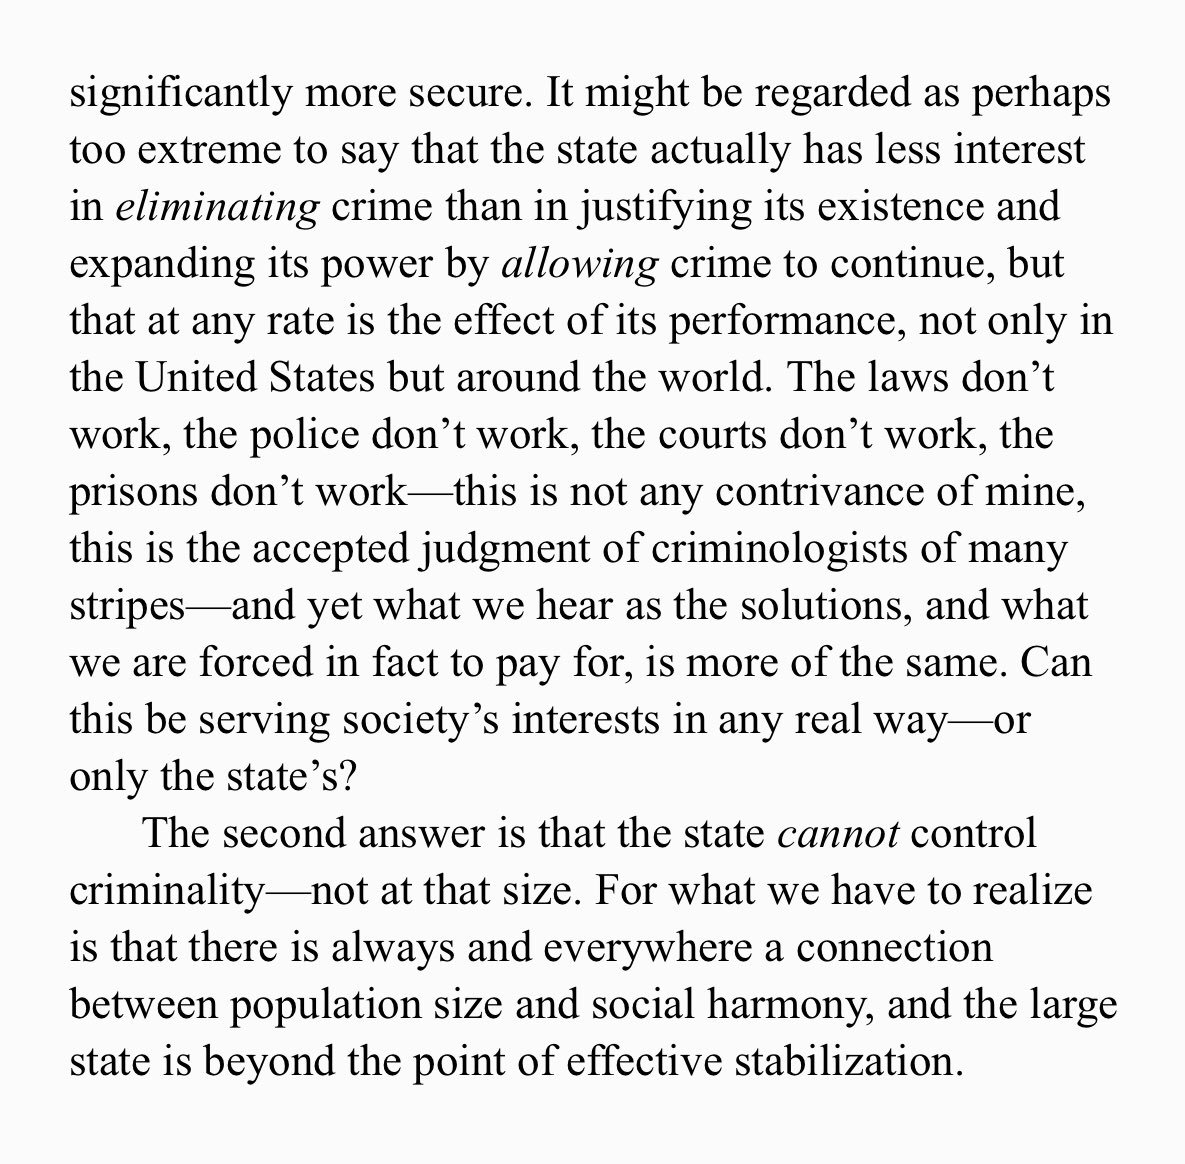 Kirkpatrick Sale on how one of the main selling points of the state is to uphold law and order. Sale doesn’t mention it for obvious reasons, but the larger the state the more diversity the more laws the more enforcement the higher costs the more state.... etc. etc.